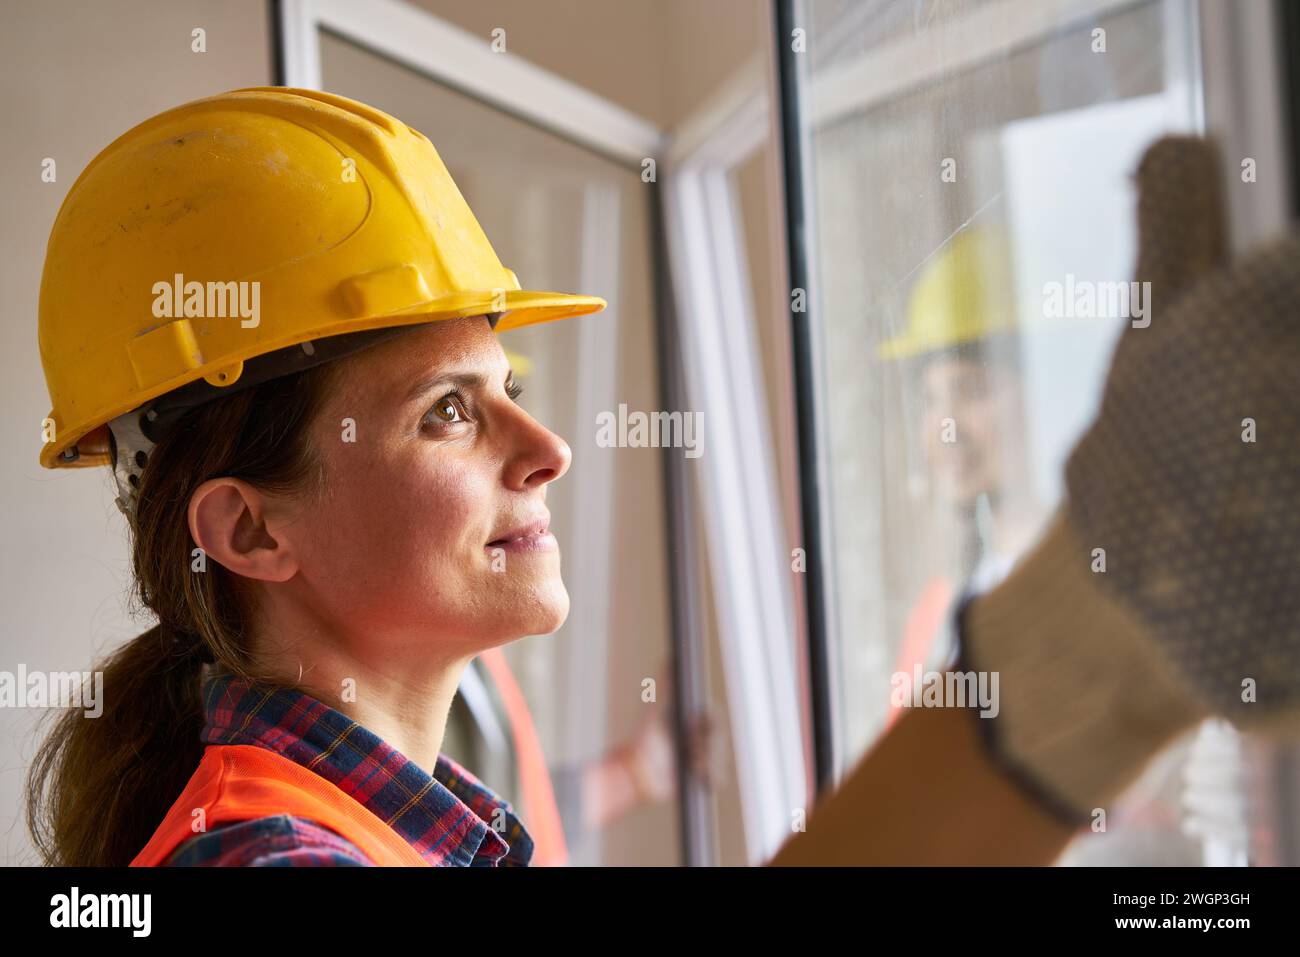 Female construction worker carrying window frame Stock Photo